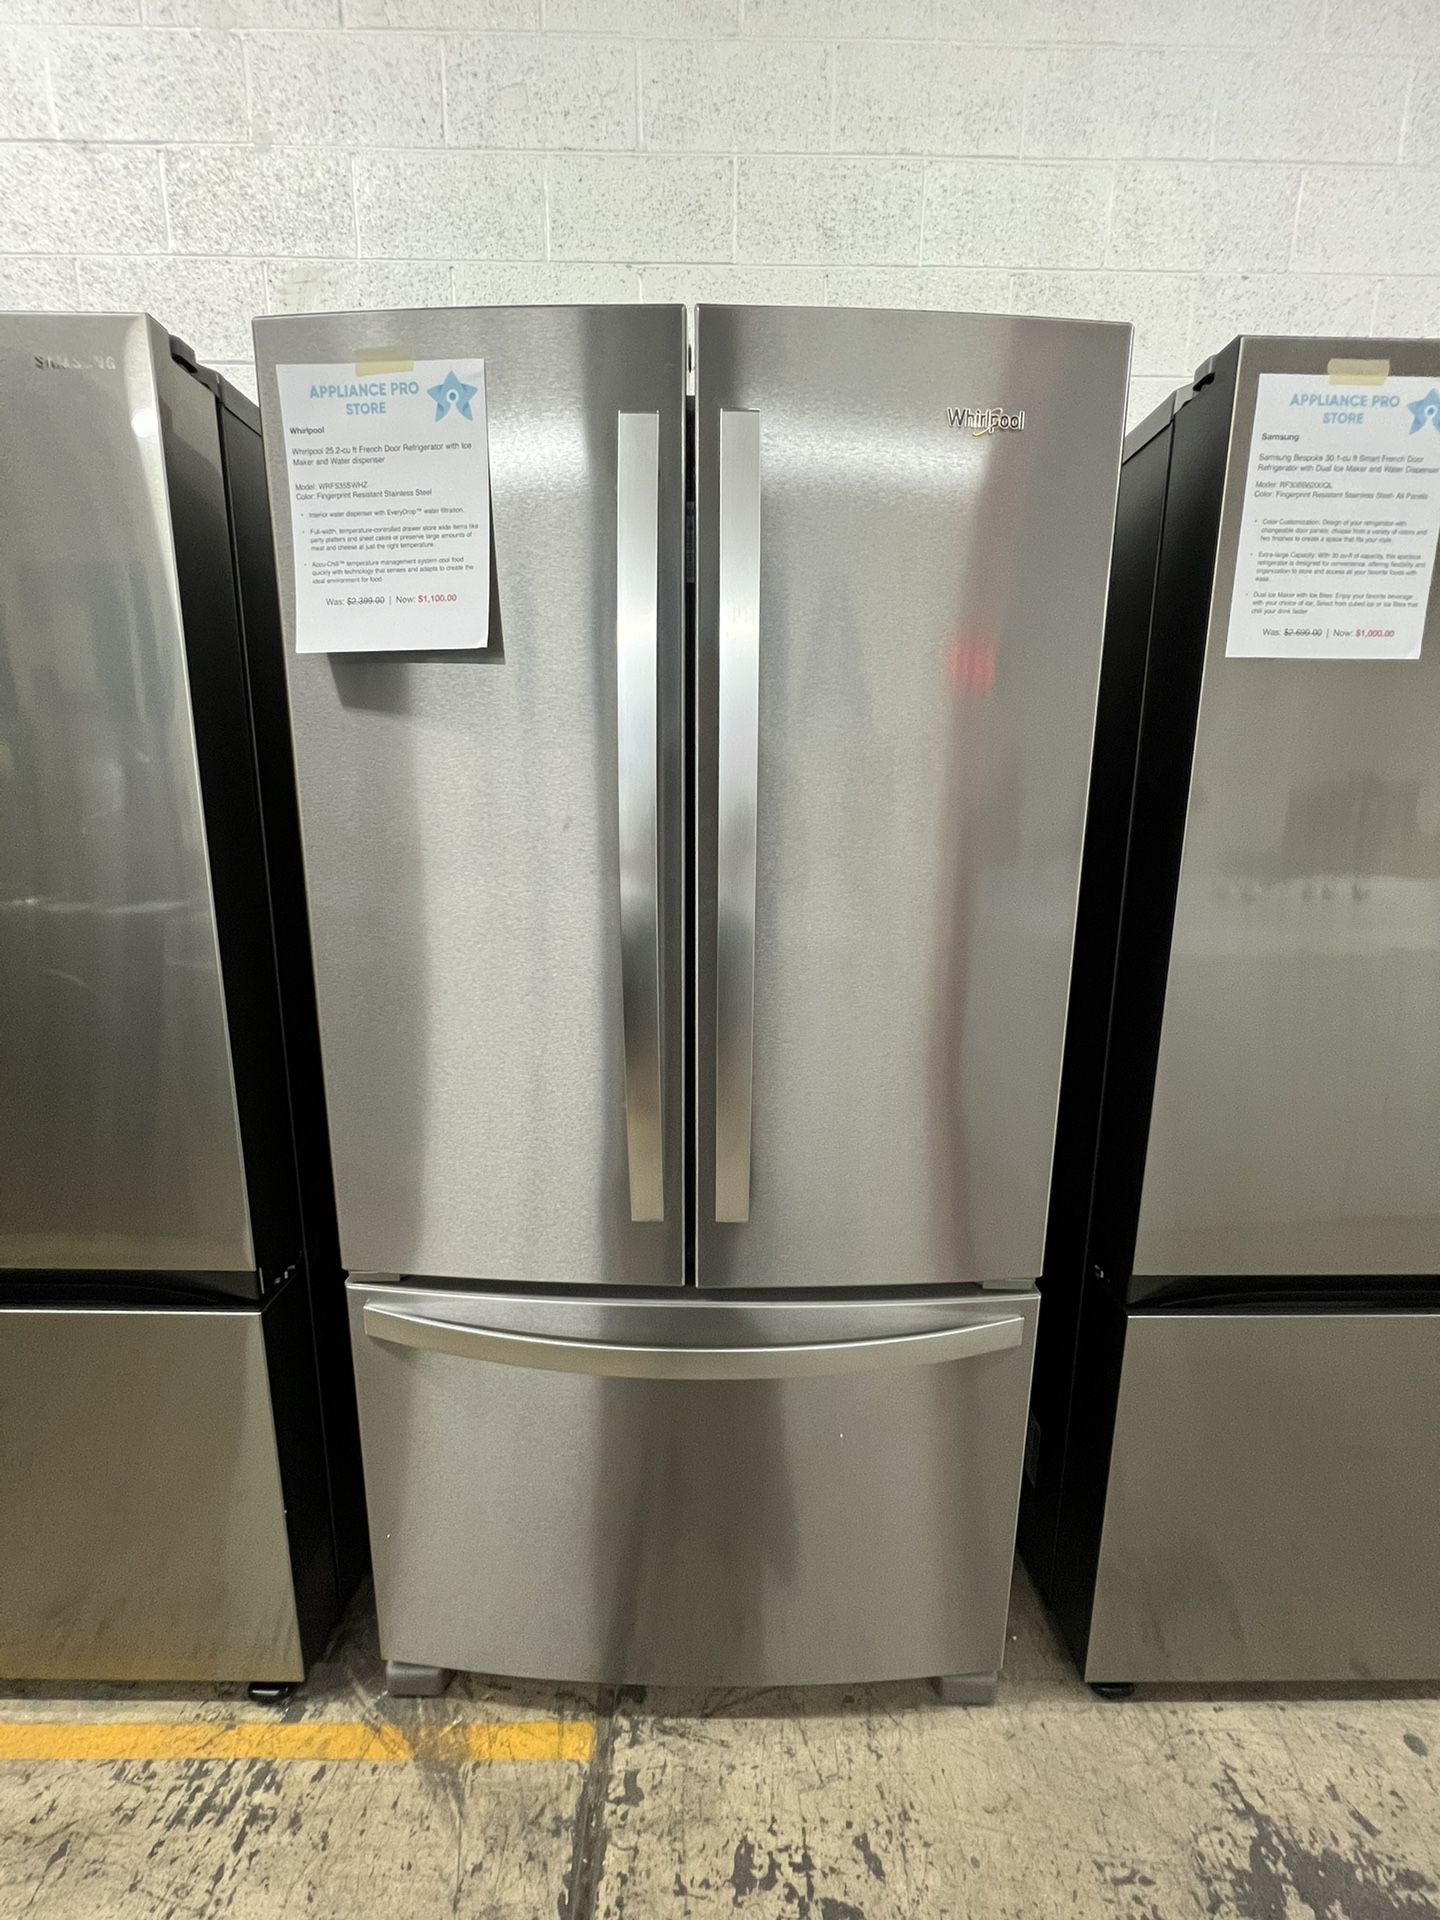 🔥New🔥 Whirlpool 25.2-cu ft French Door Refrigerator with Ice Maker and Water dispenser